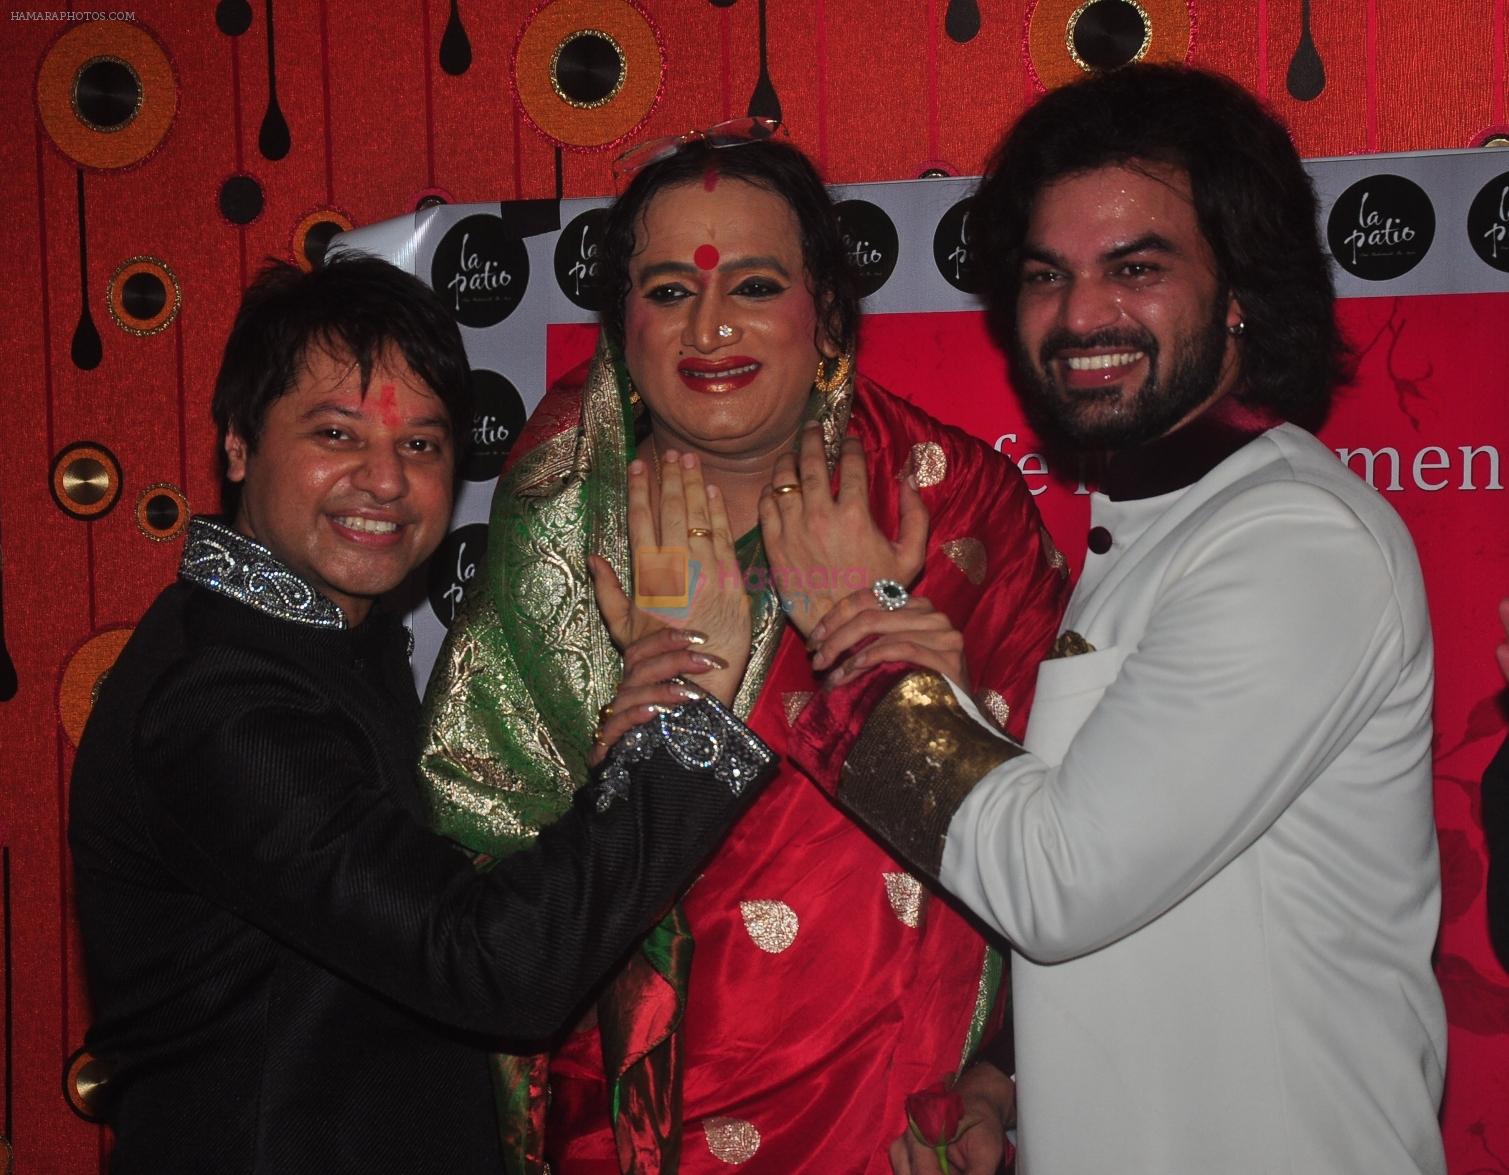 Lakshminarayan Tripathi blesses Kapil Sharma and Yuvraaj Parashar at the Aryan-Ashley sangeet of Dunno Y2 signifying same-sex marriage for the first time in Bollywood